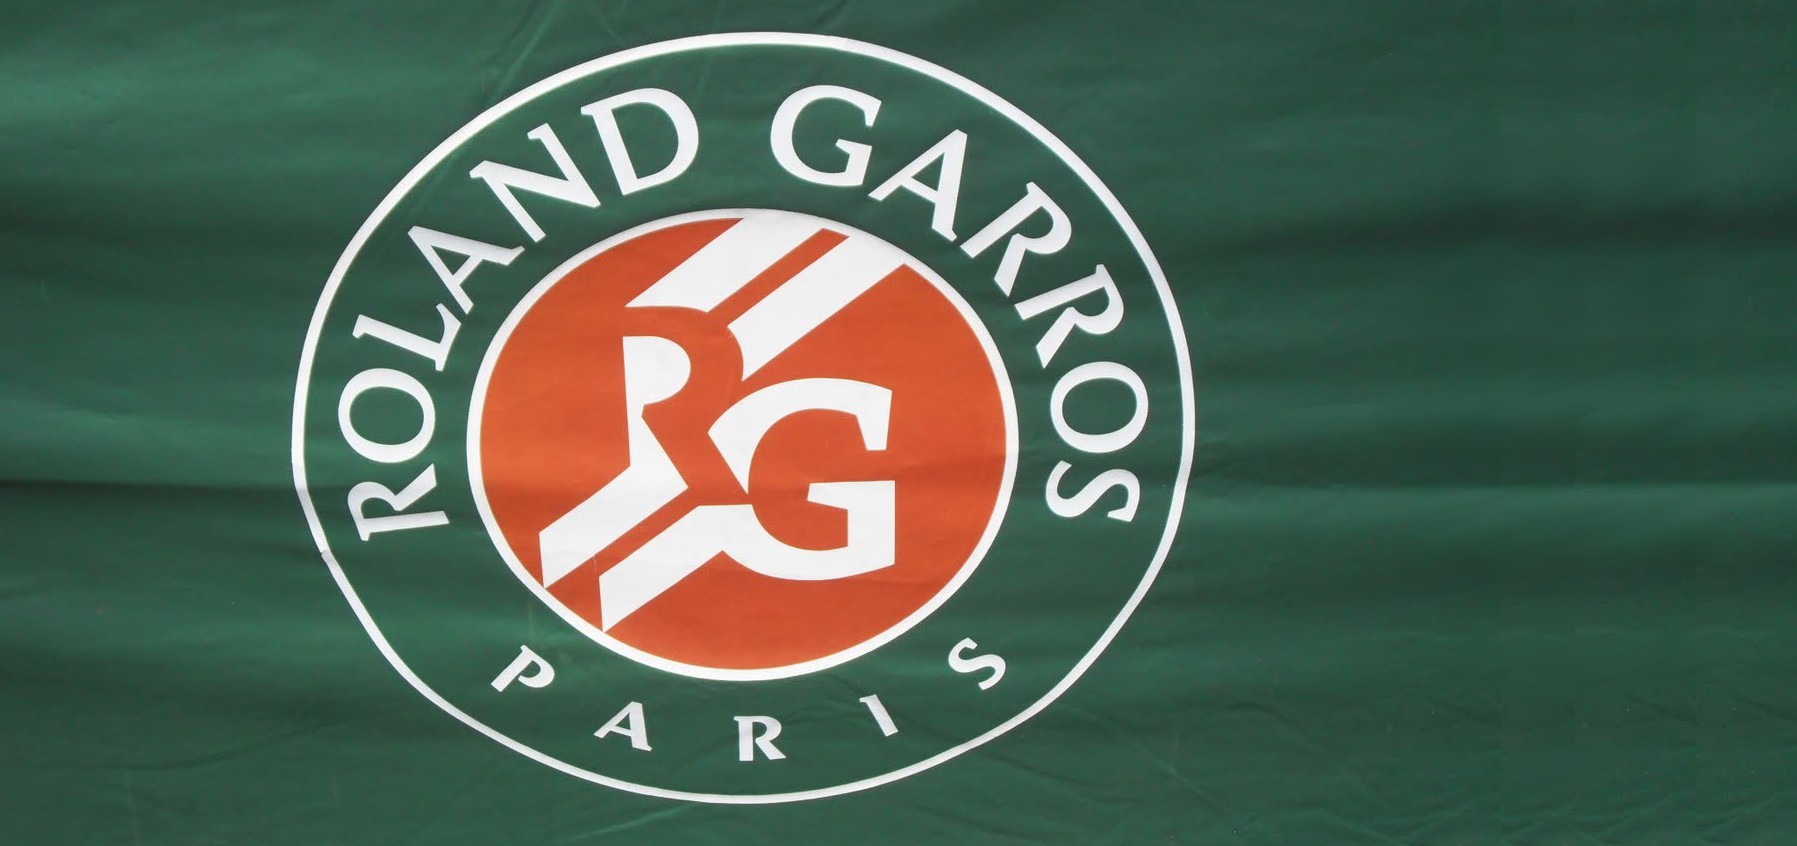 War on Clay: French Open